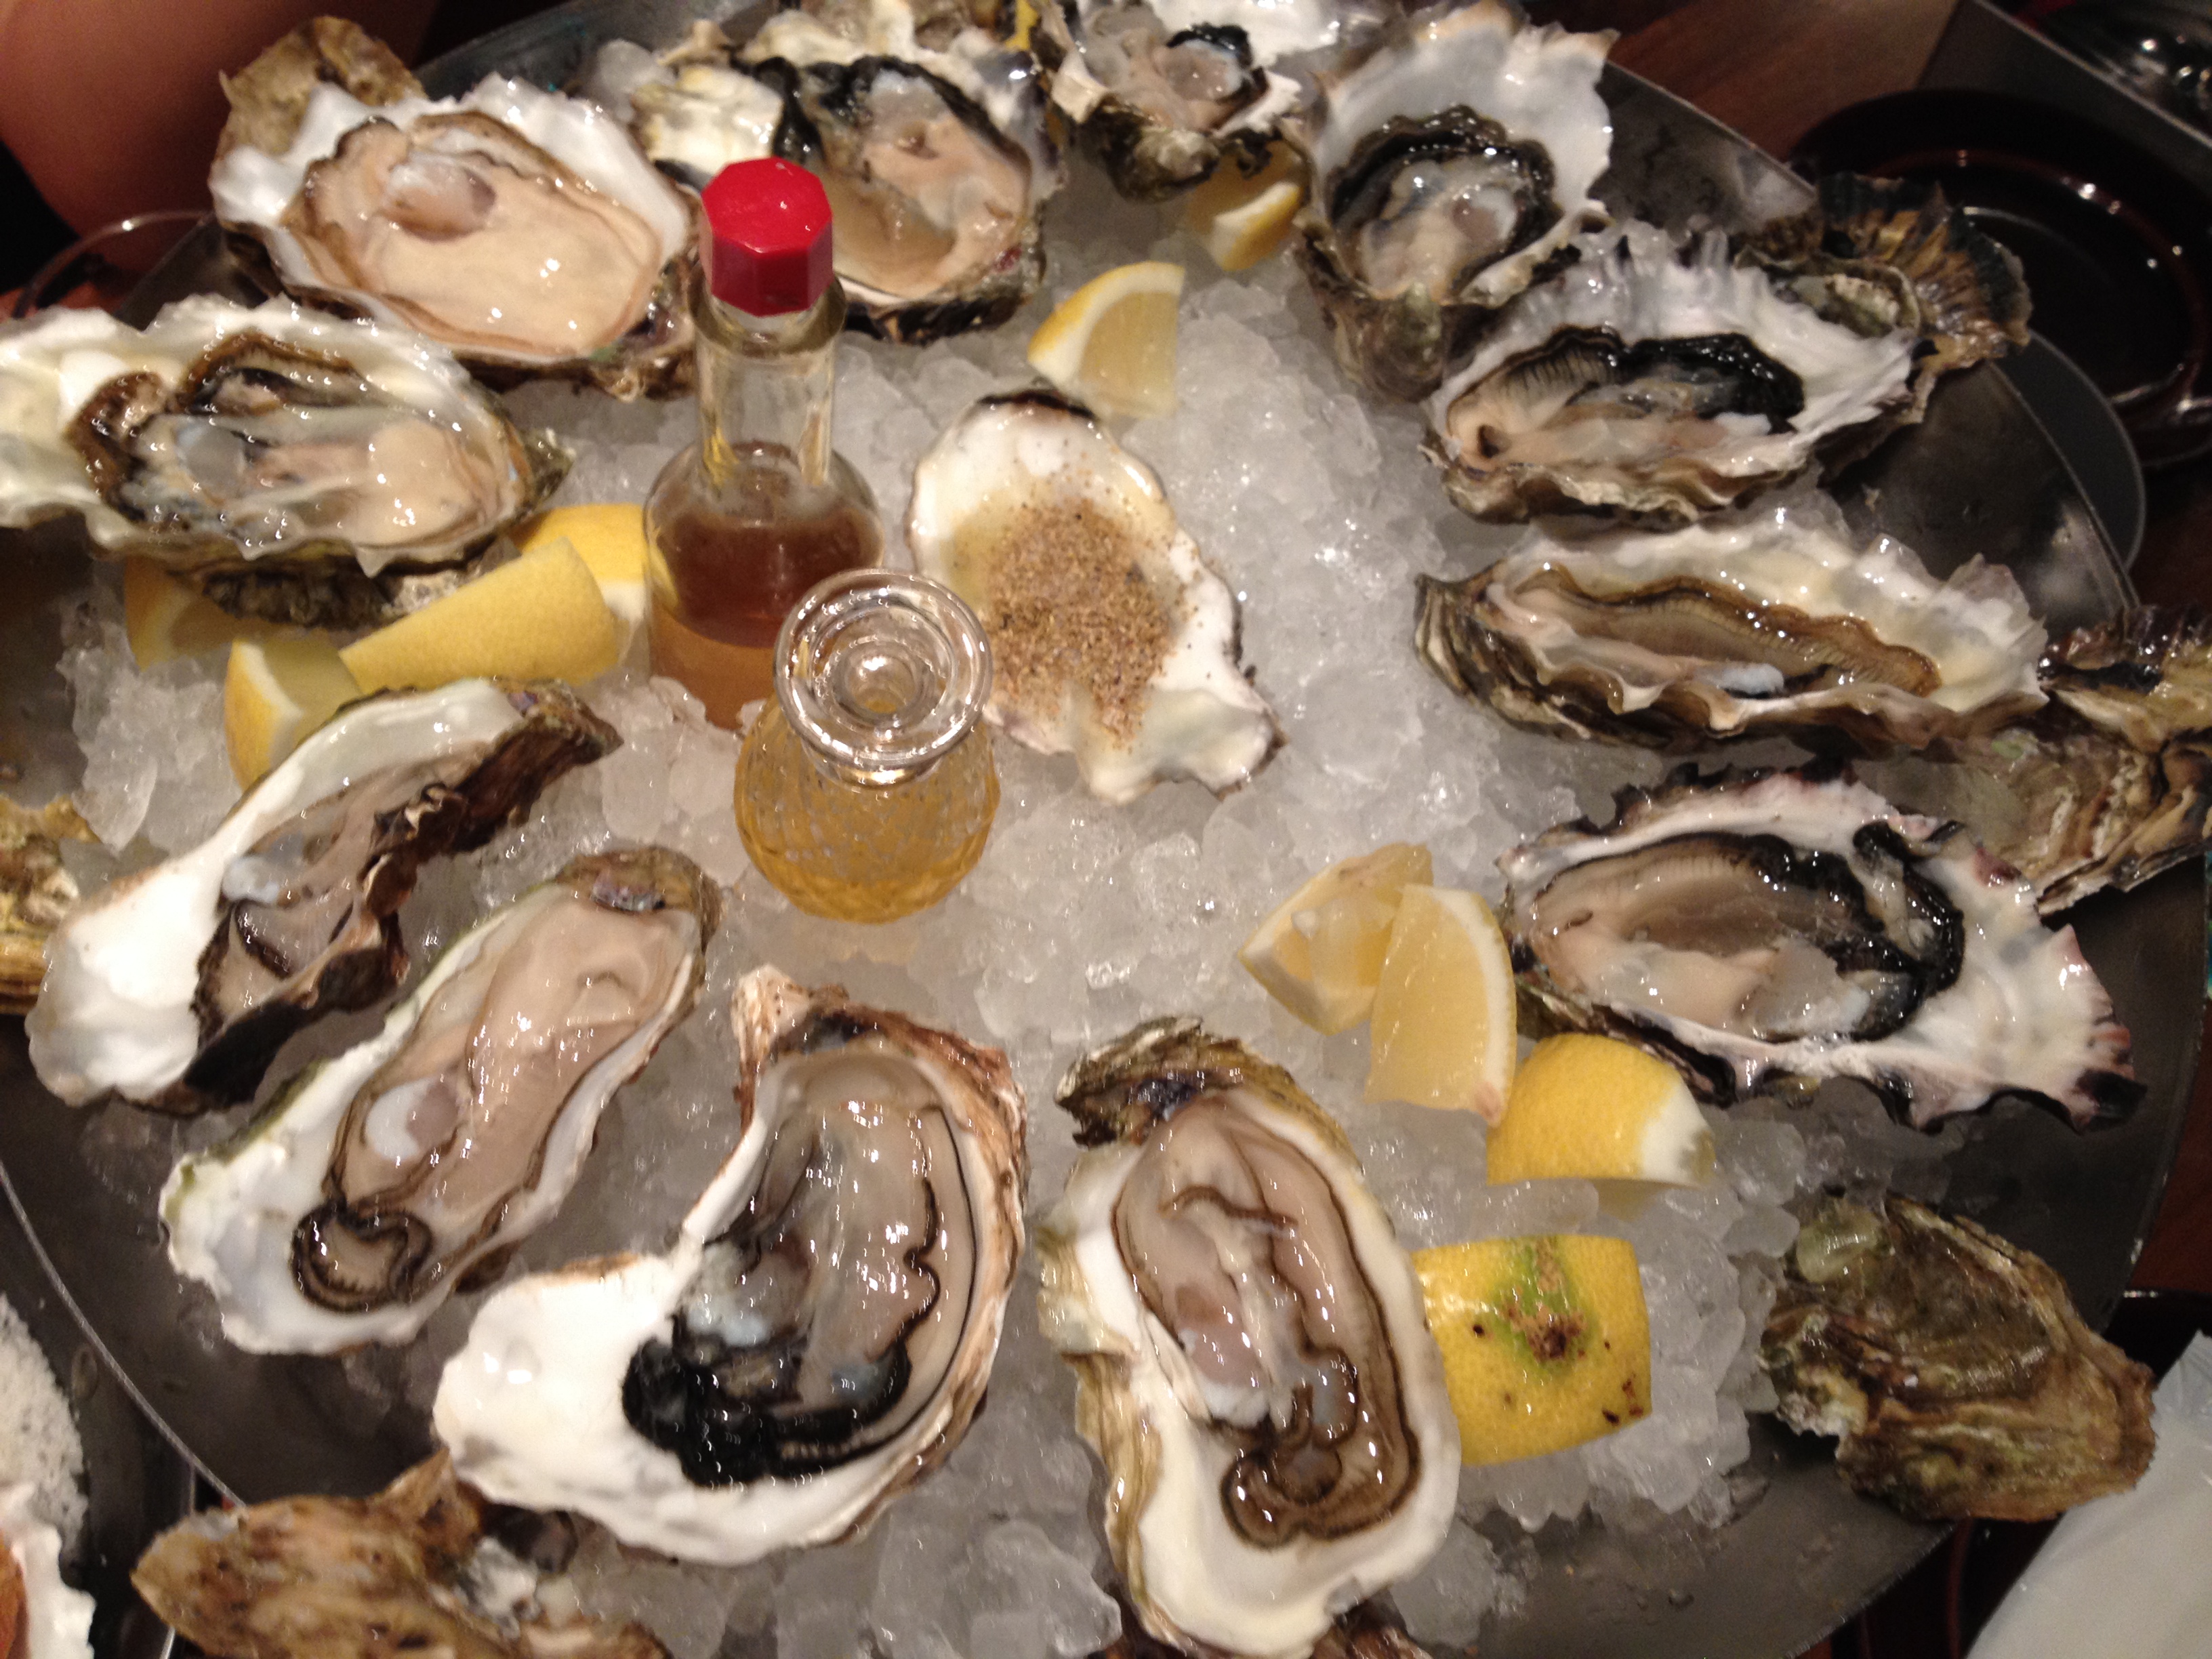 Oysters Grill & Bar Wharf (Robertson Quay) - 1 Dozen of Oysters